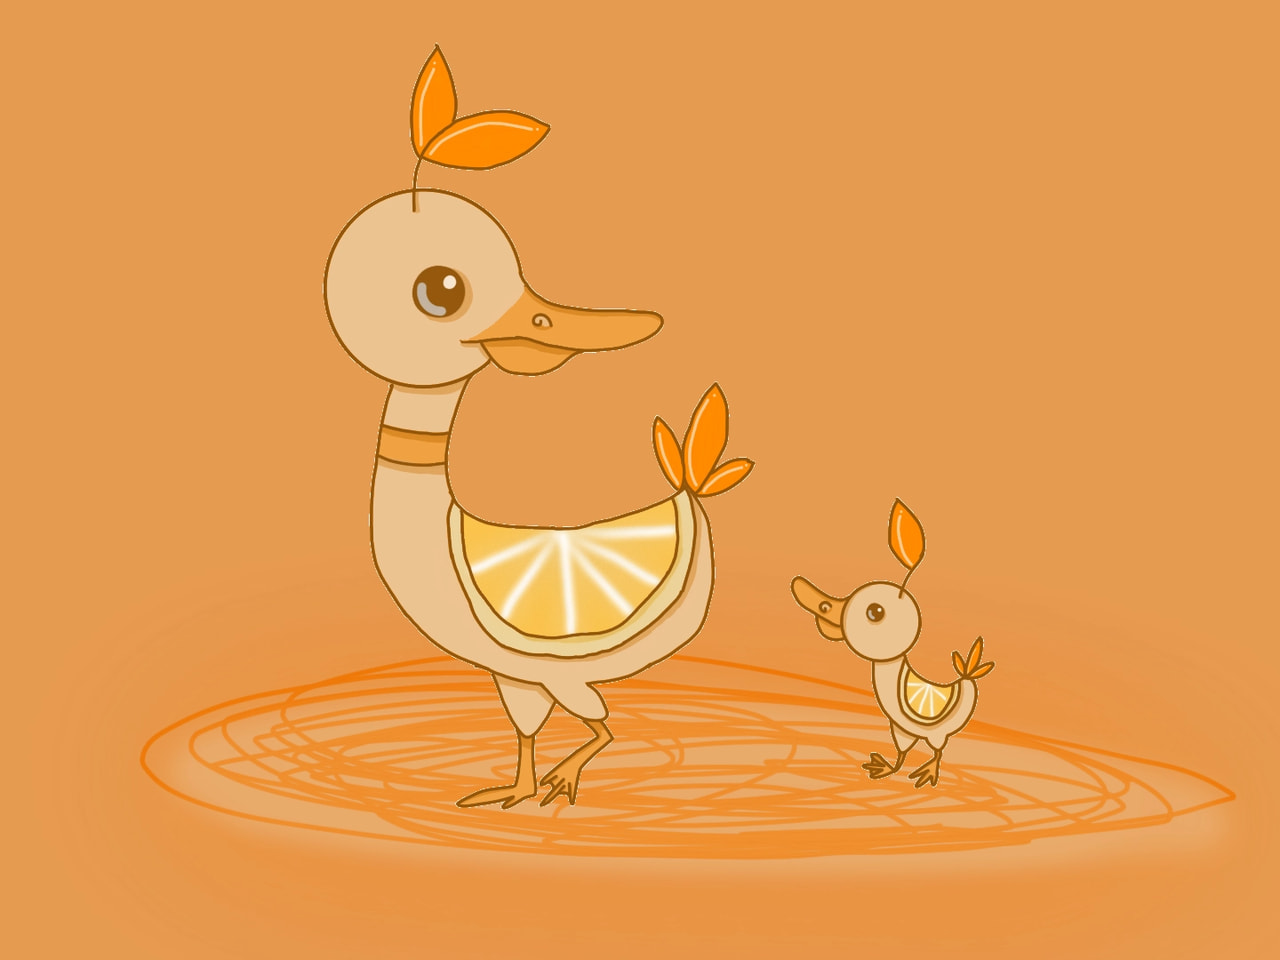 Kind of rushed this one, but think it still worked out. I drew a mama duck with her duckling. #orangechallenge #colorweek #ducks #duckling #orange Edit: Thank you all so much for the feature. I appreciate all of your love and support!